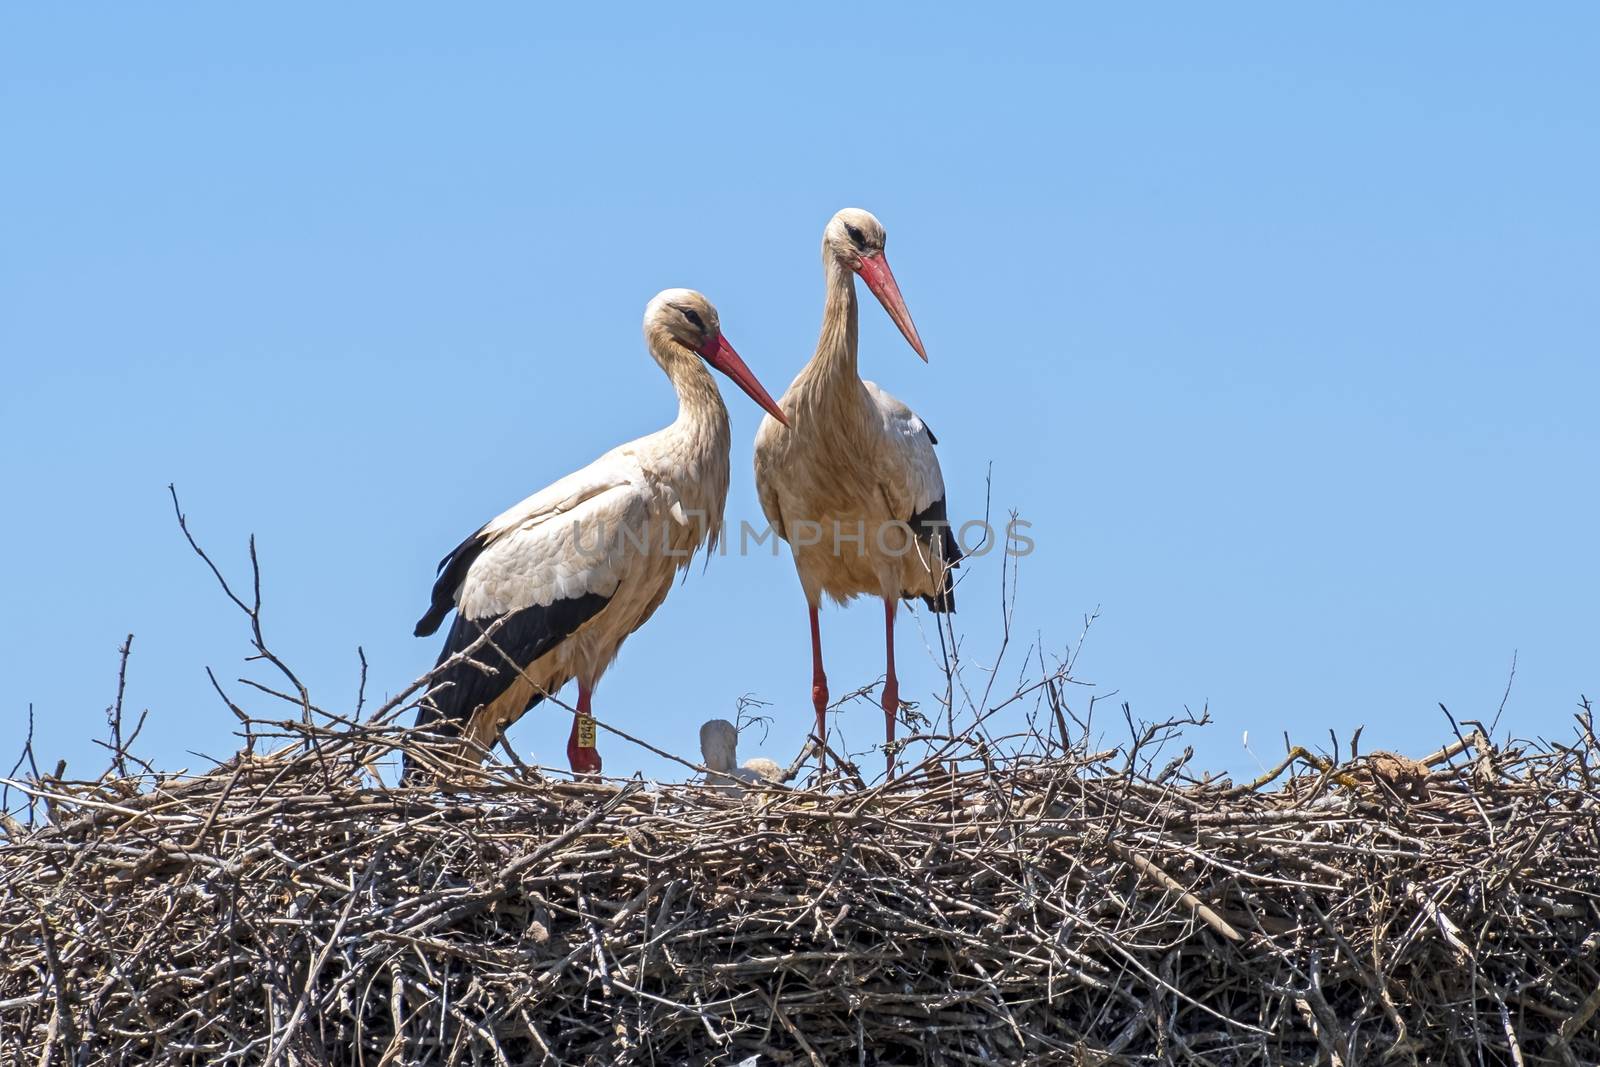 Storks with their babies on the nest in Portugal by devy